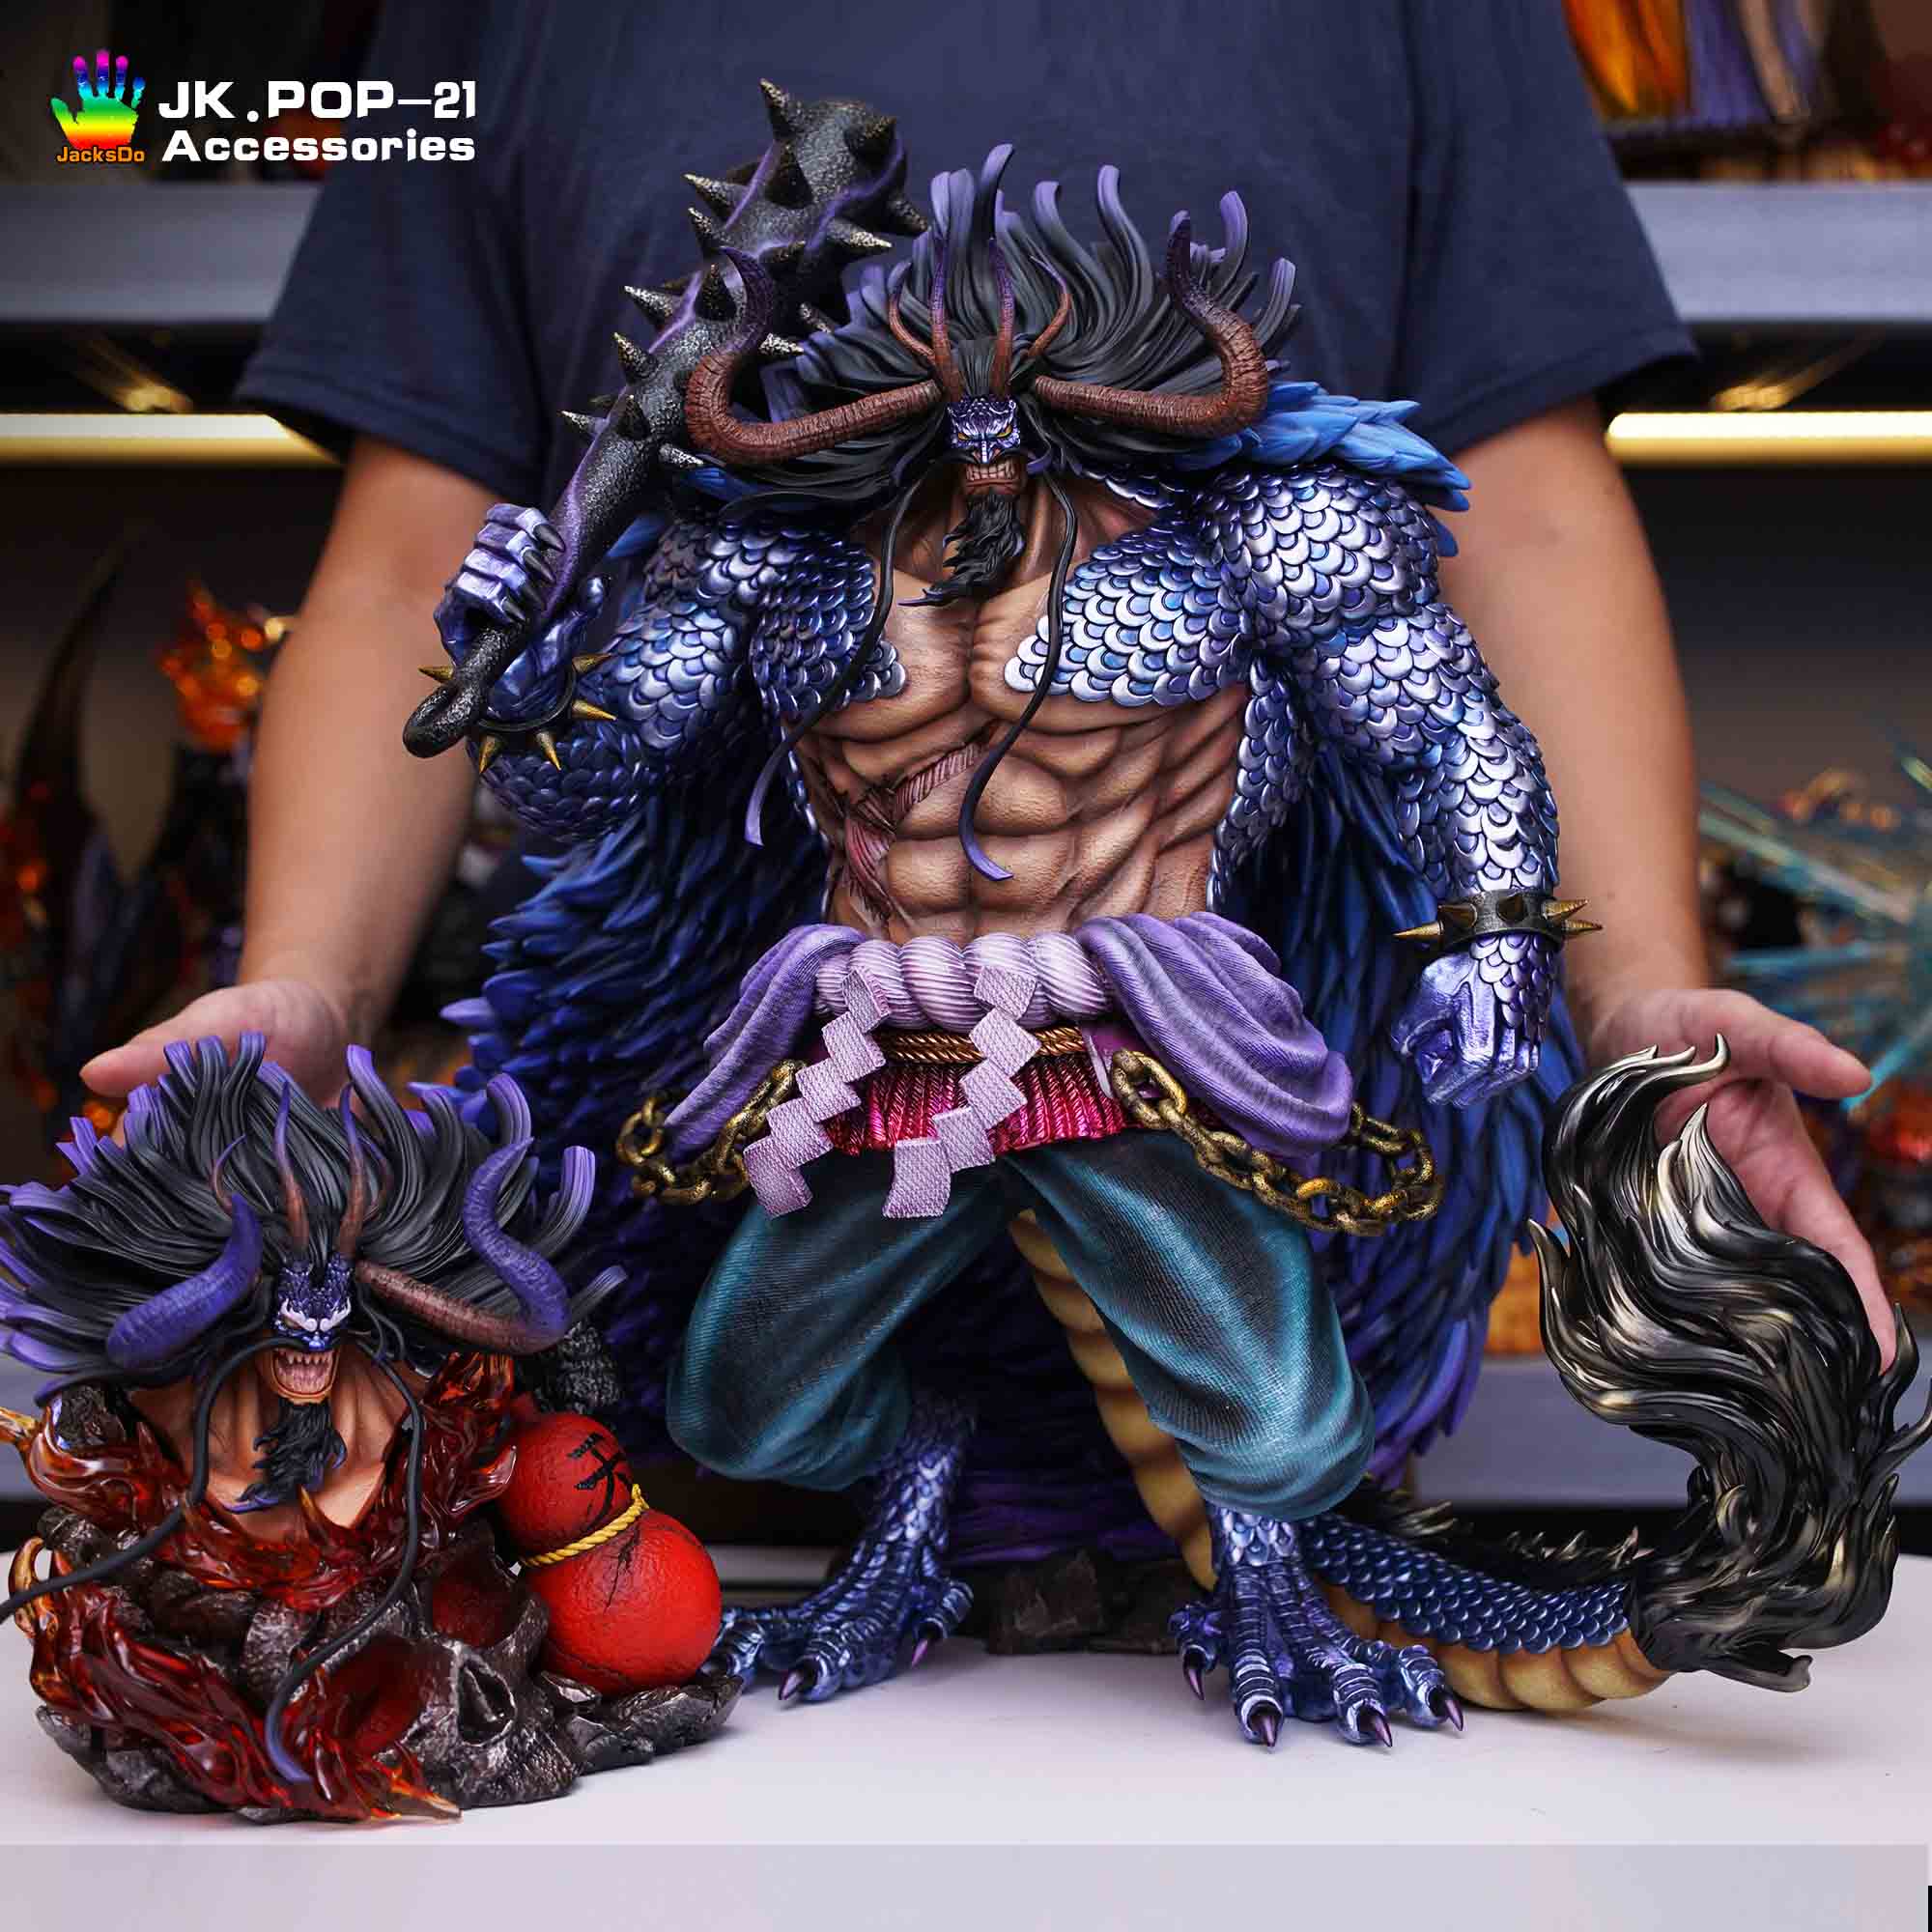 borjal on X: Kaido. I wanted to sculpt muscles onto a roblox body so I  chose to try and make kaido, fully textured and finished, showing the back,  inner arms, and obliques/serratus